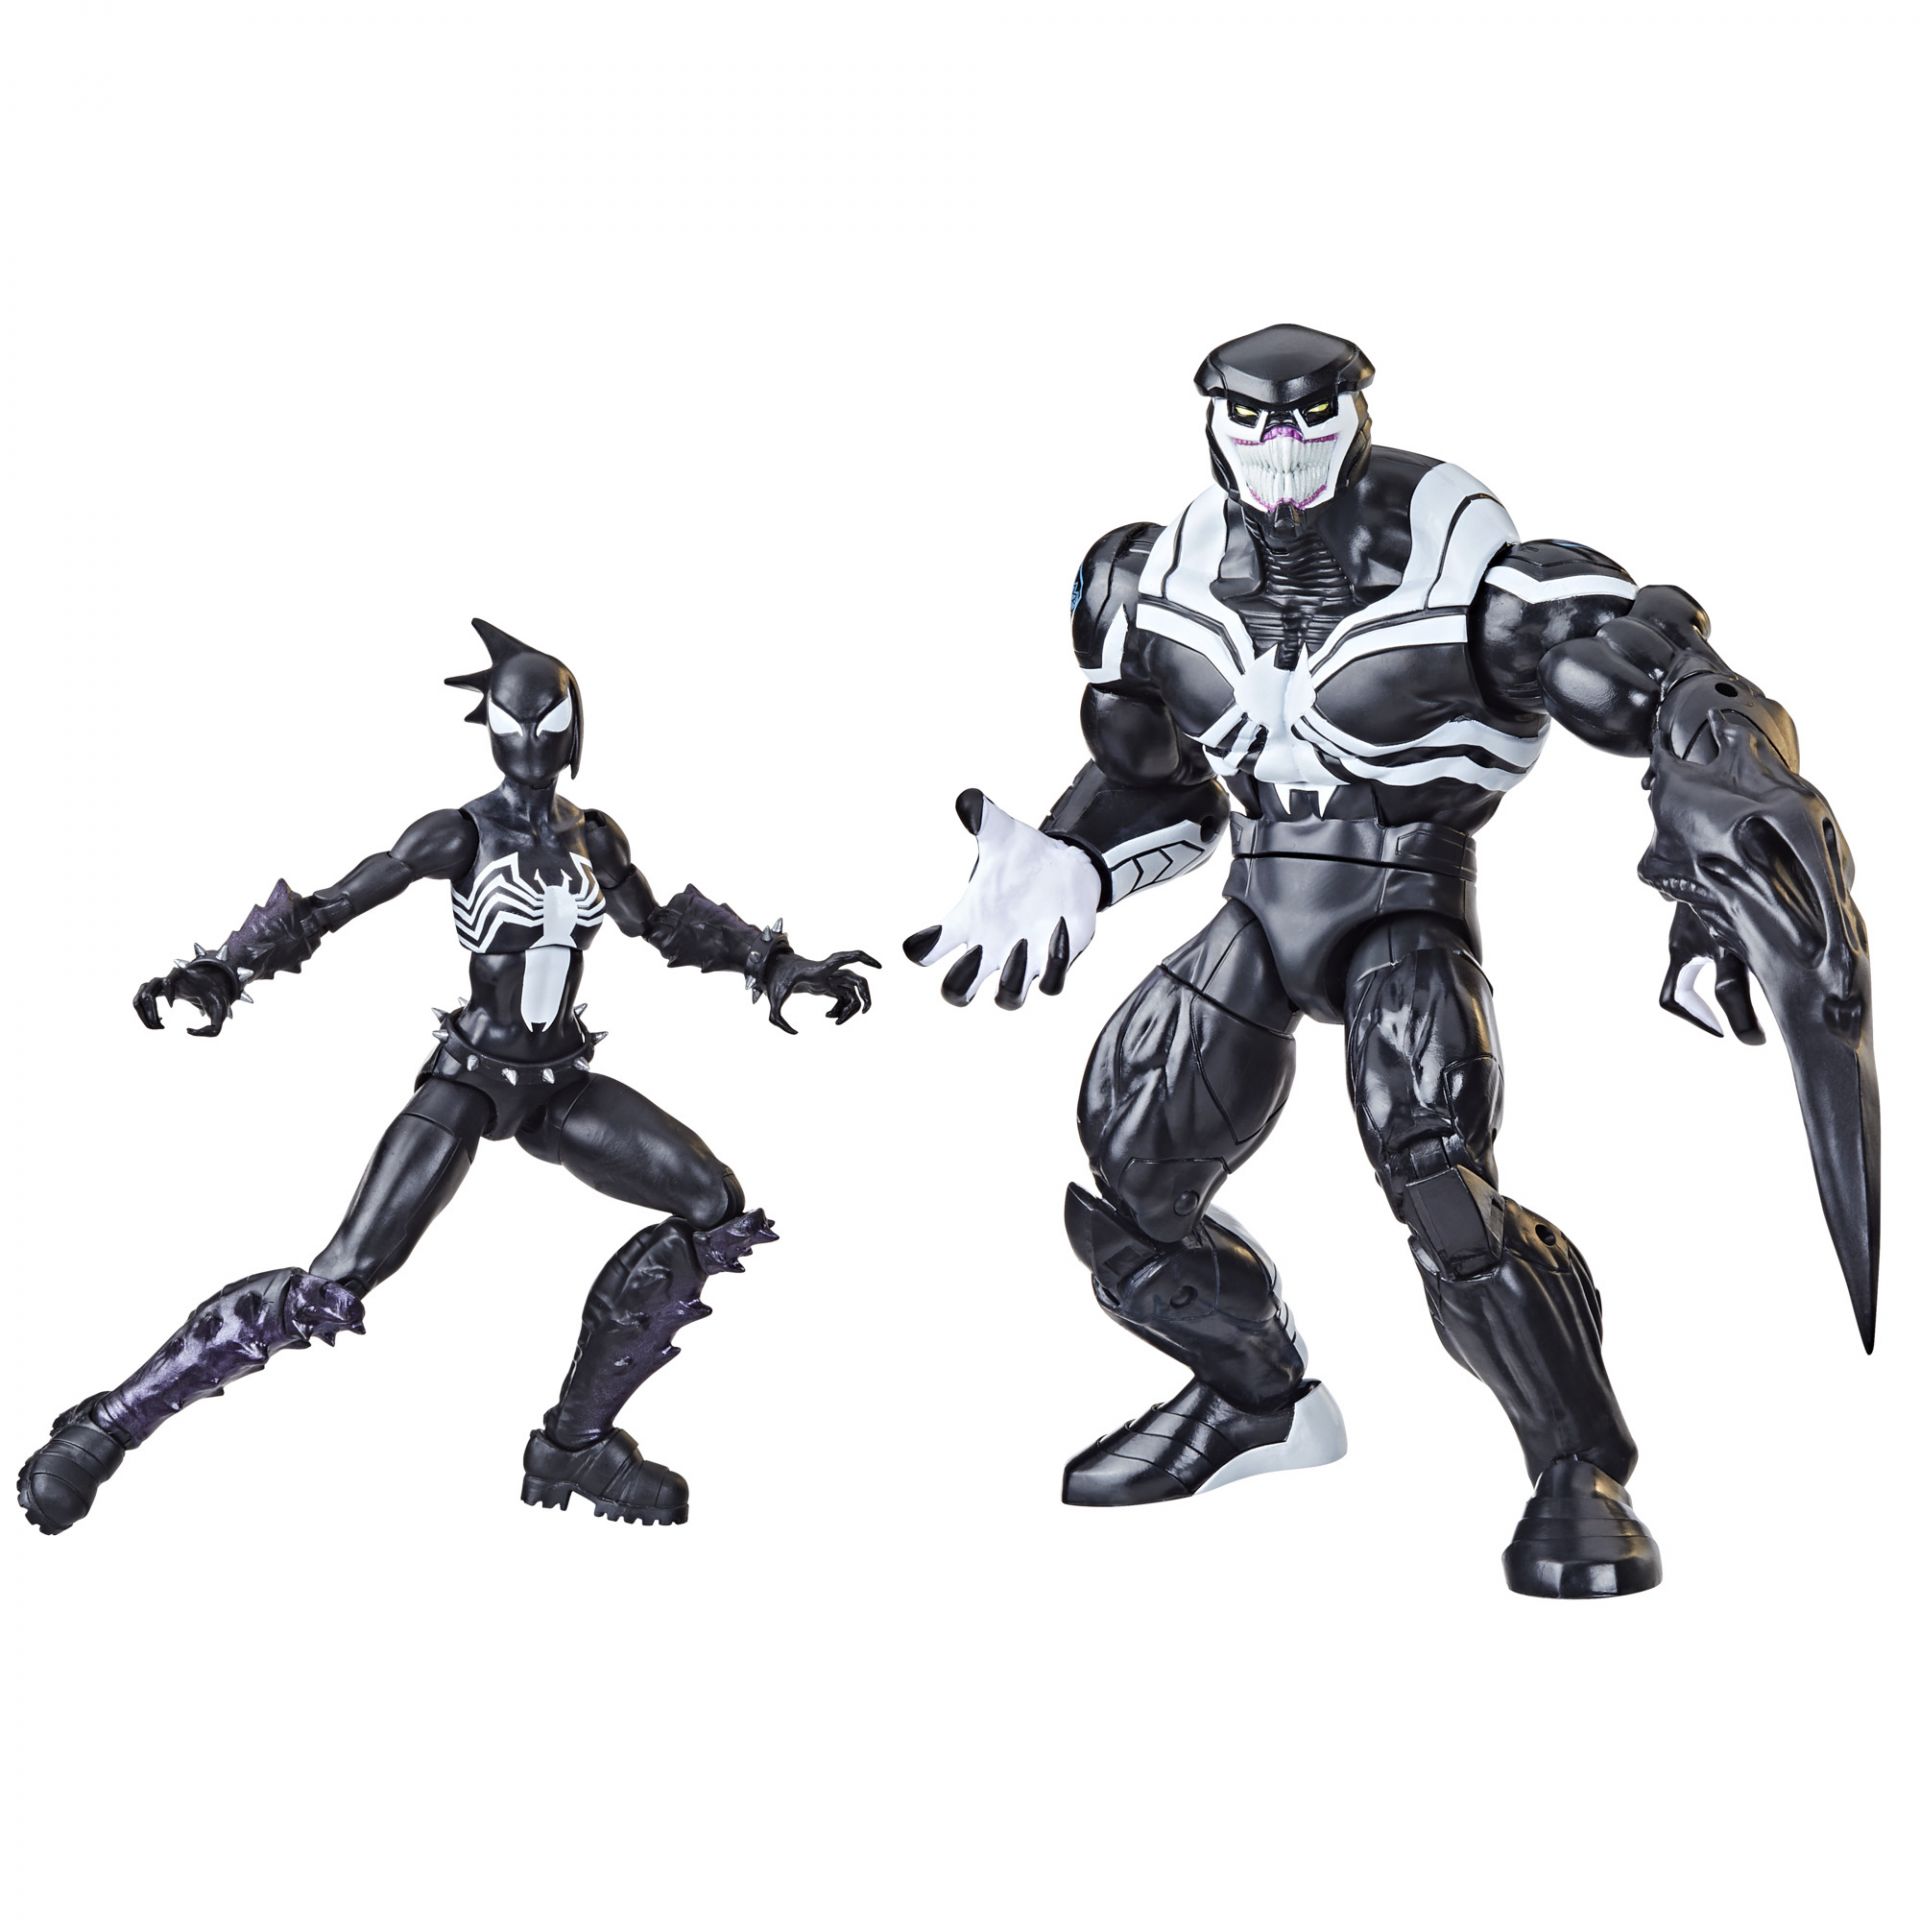 Marvel Legends Marvel's Mania And Venom Space Knight Action Figure